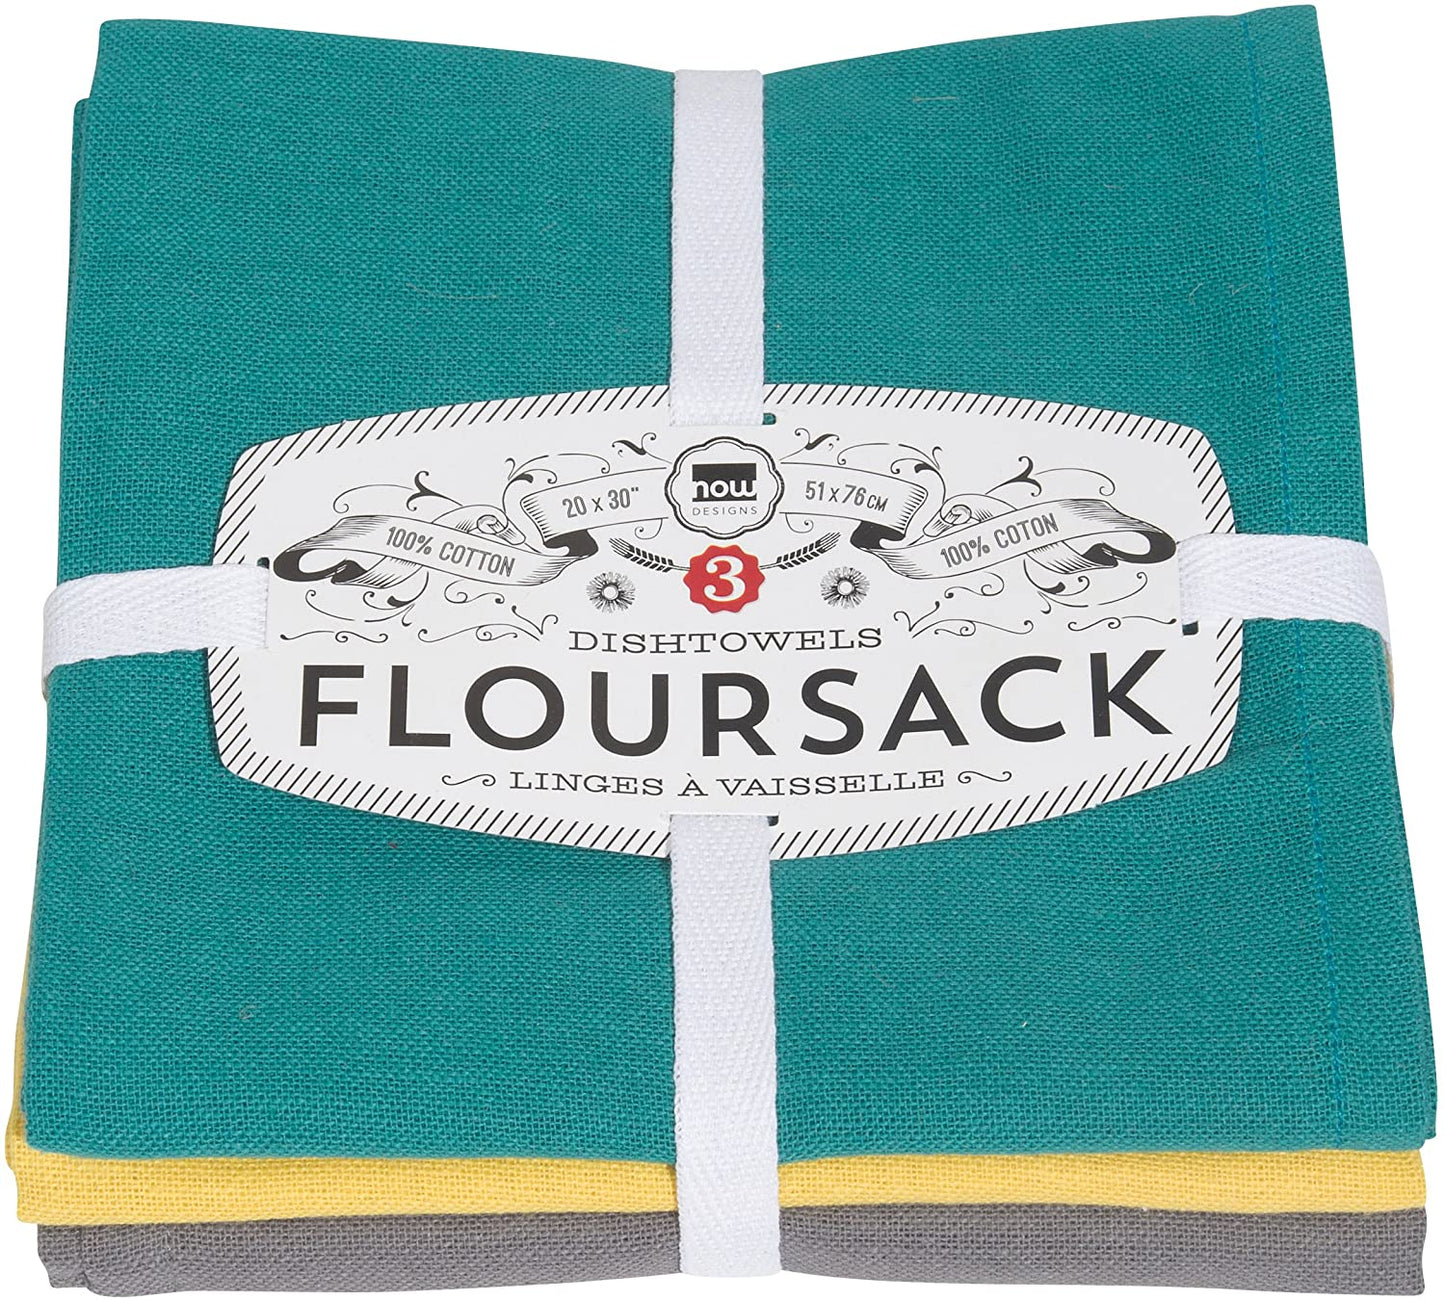 3 floursack towels folded and tied together with packaging.